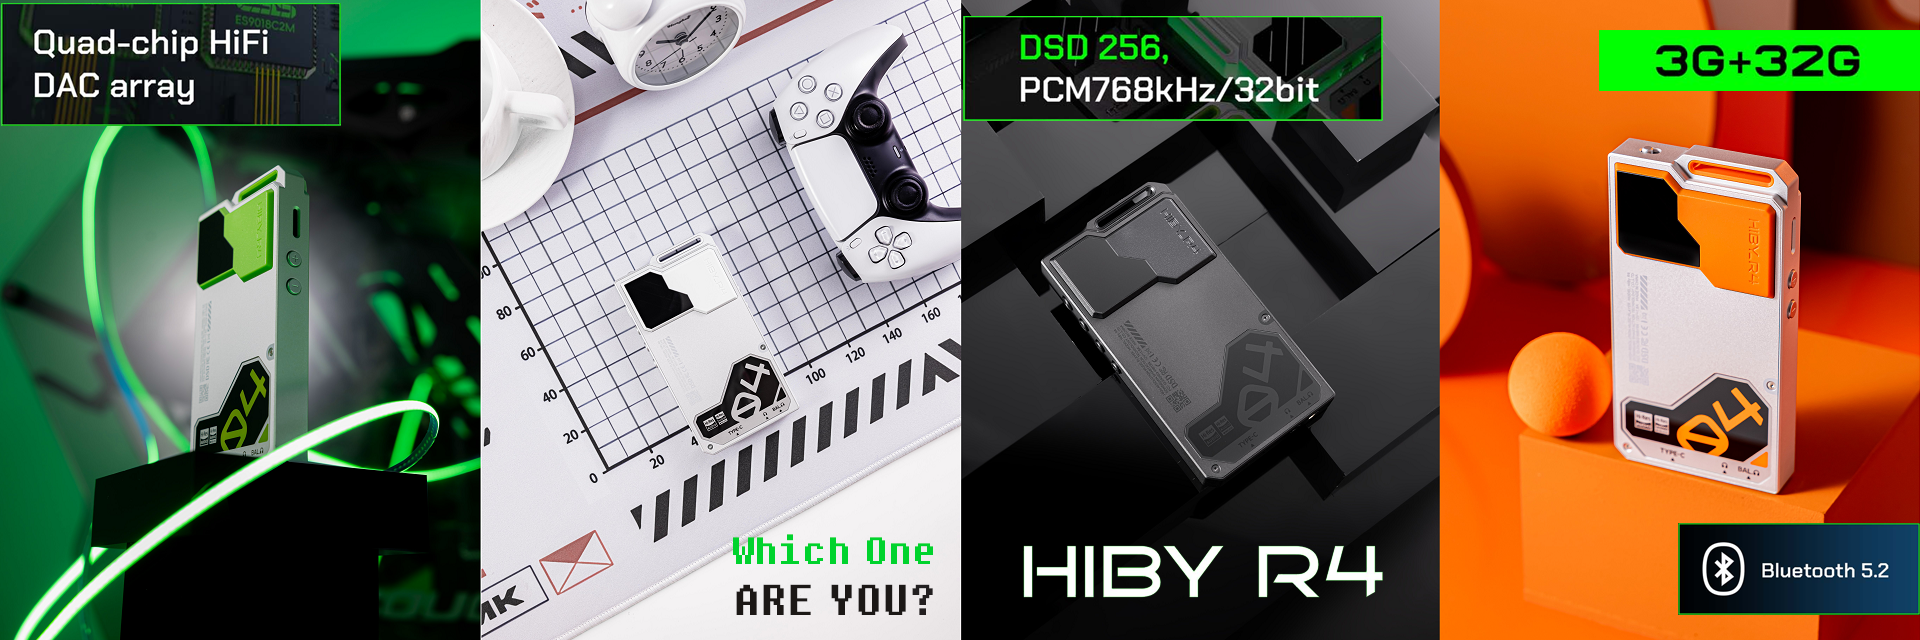 Hiby R4 Audio Players